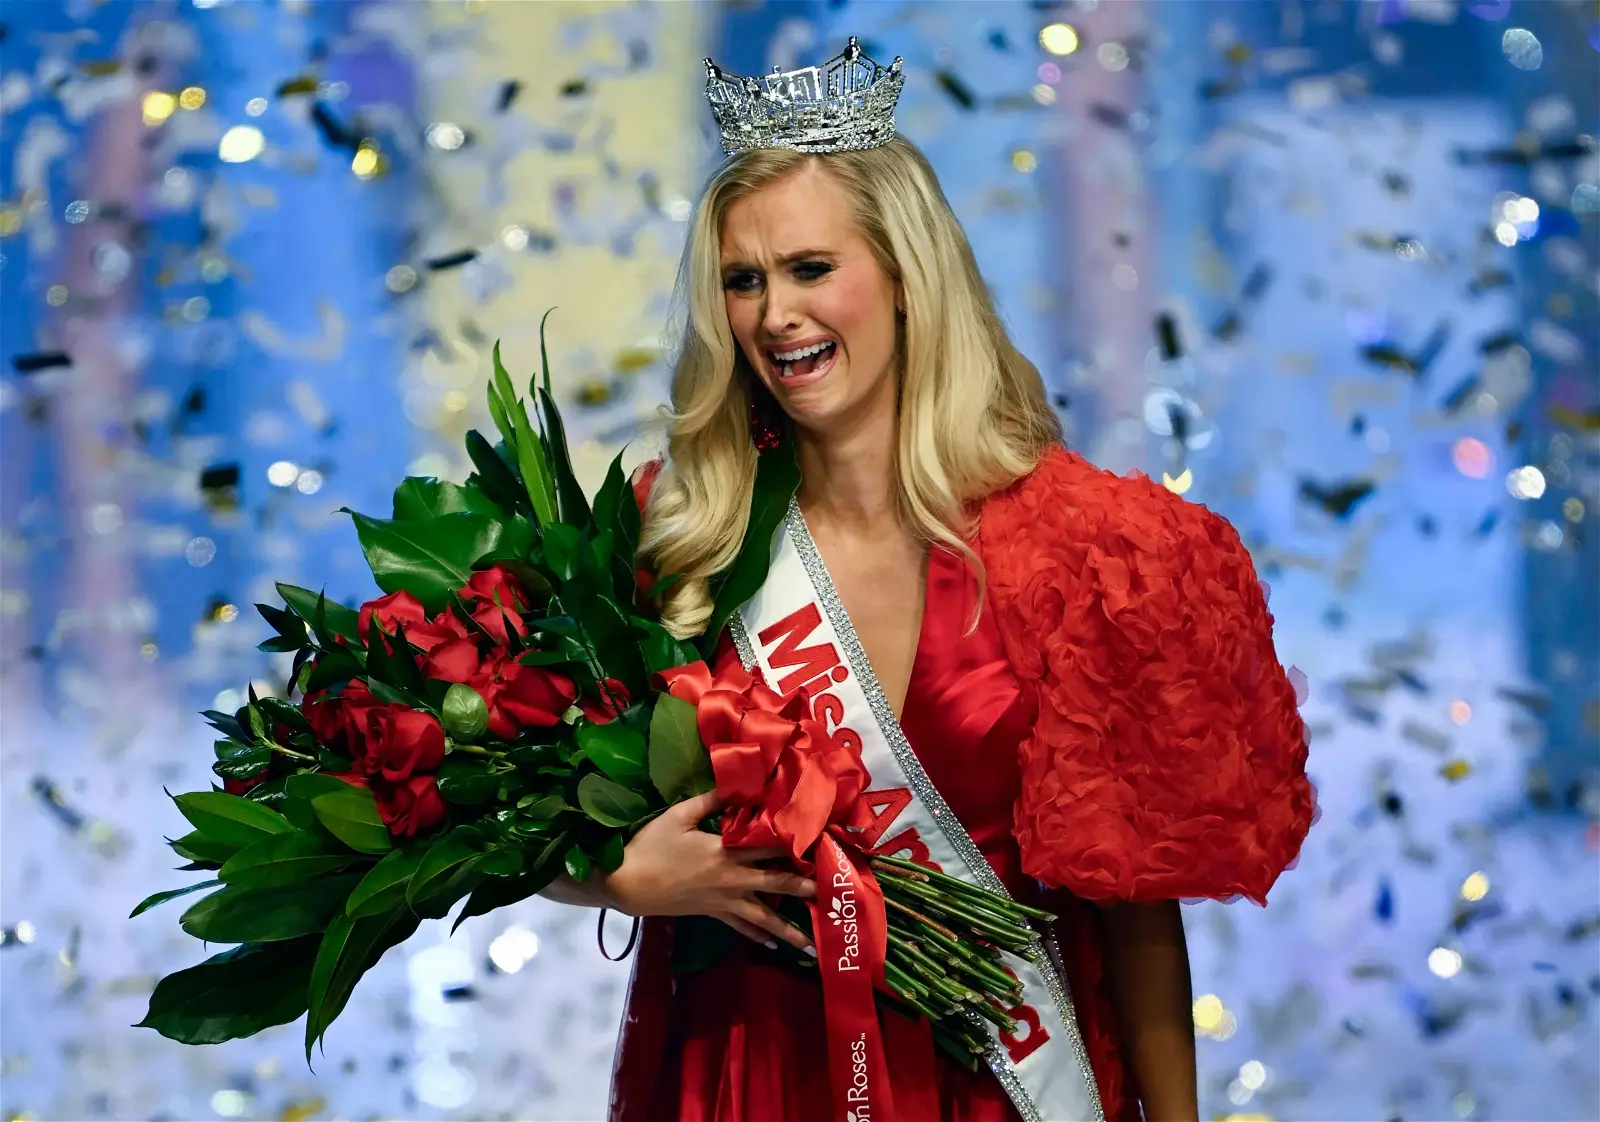 22yearold US Air Force officer makes history as Miss America